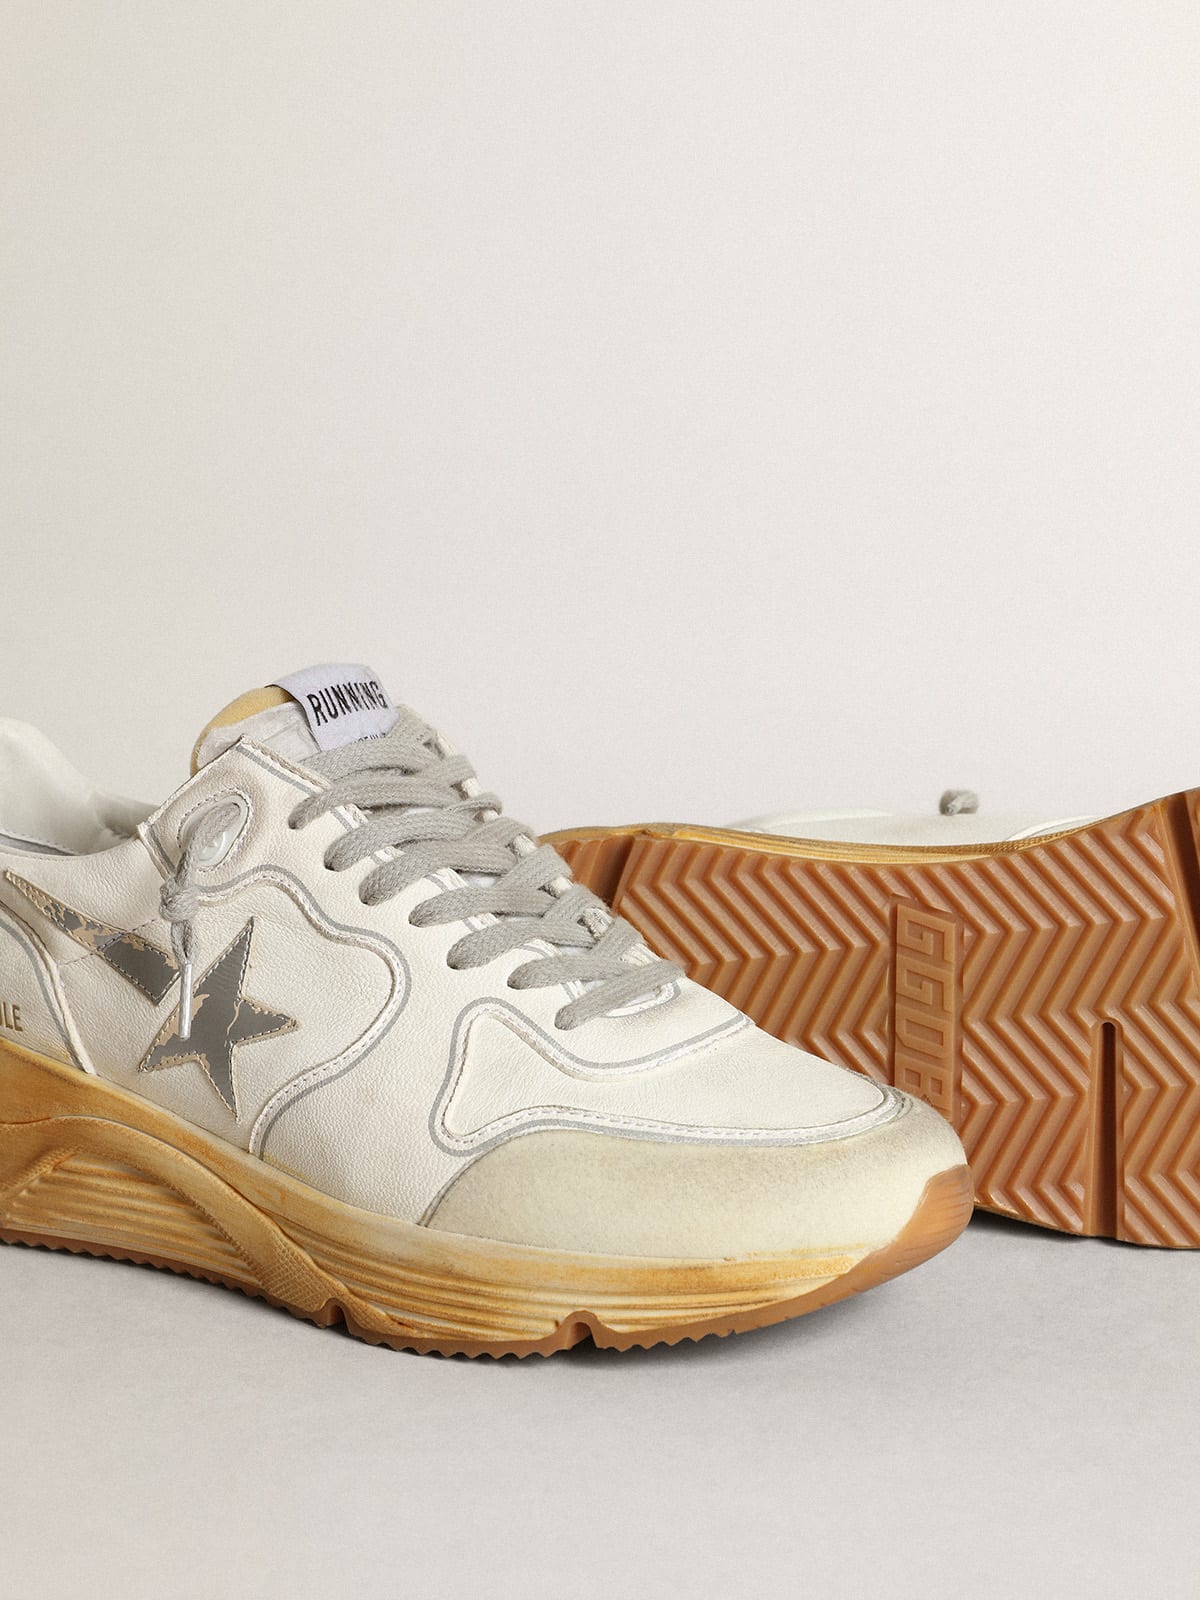 Golden Goose - Women's Running Sole with leather star and heel tab with silver print in 